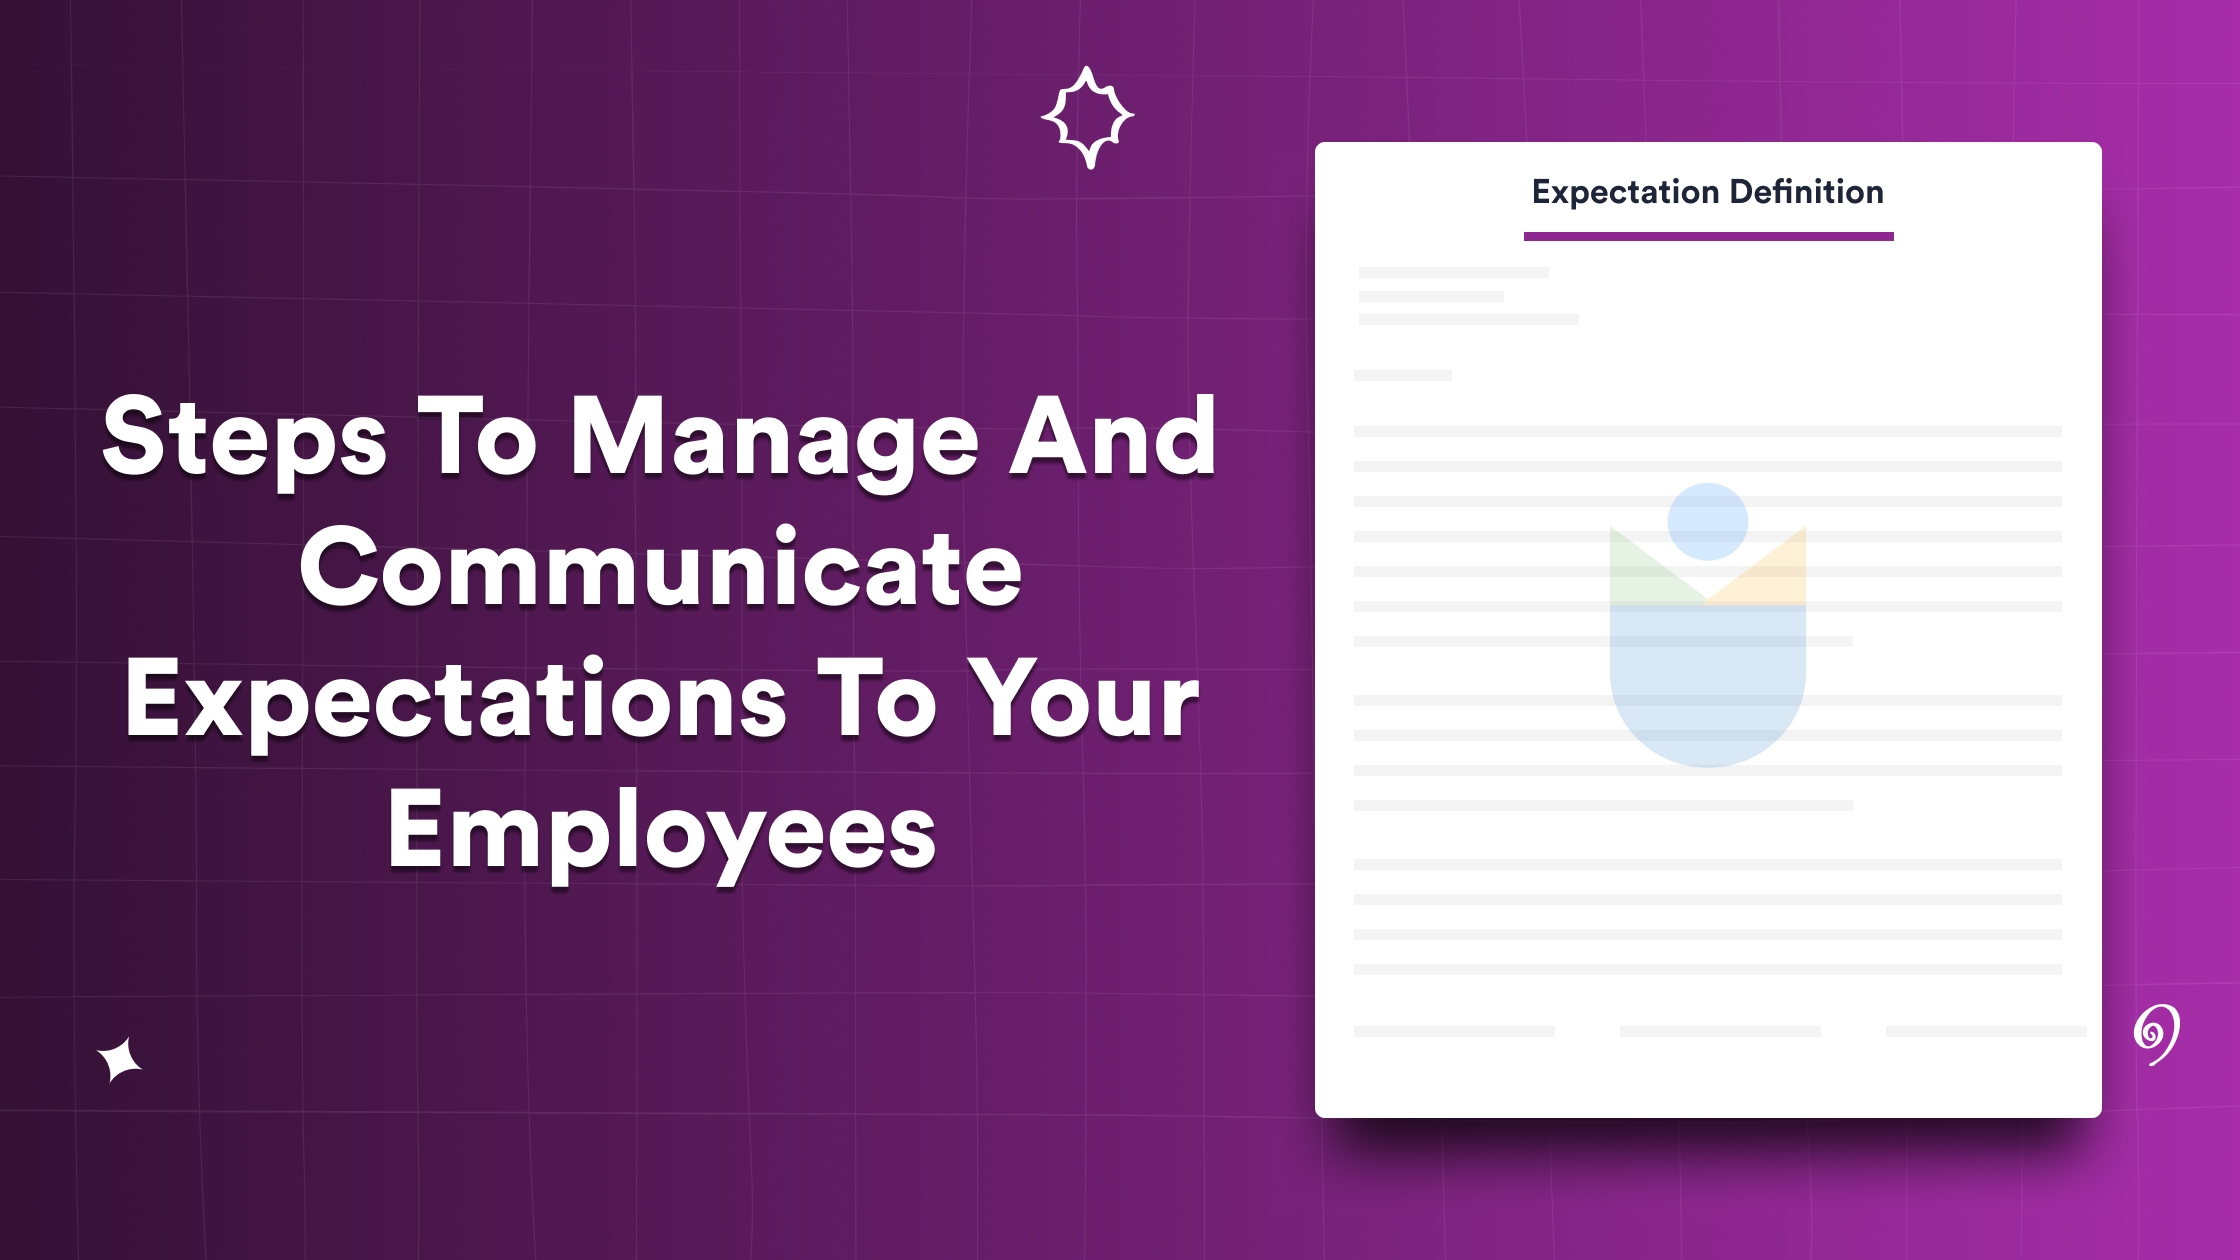 Steps to Manage and Communicate Expectations to Your Employees